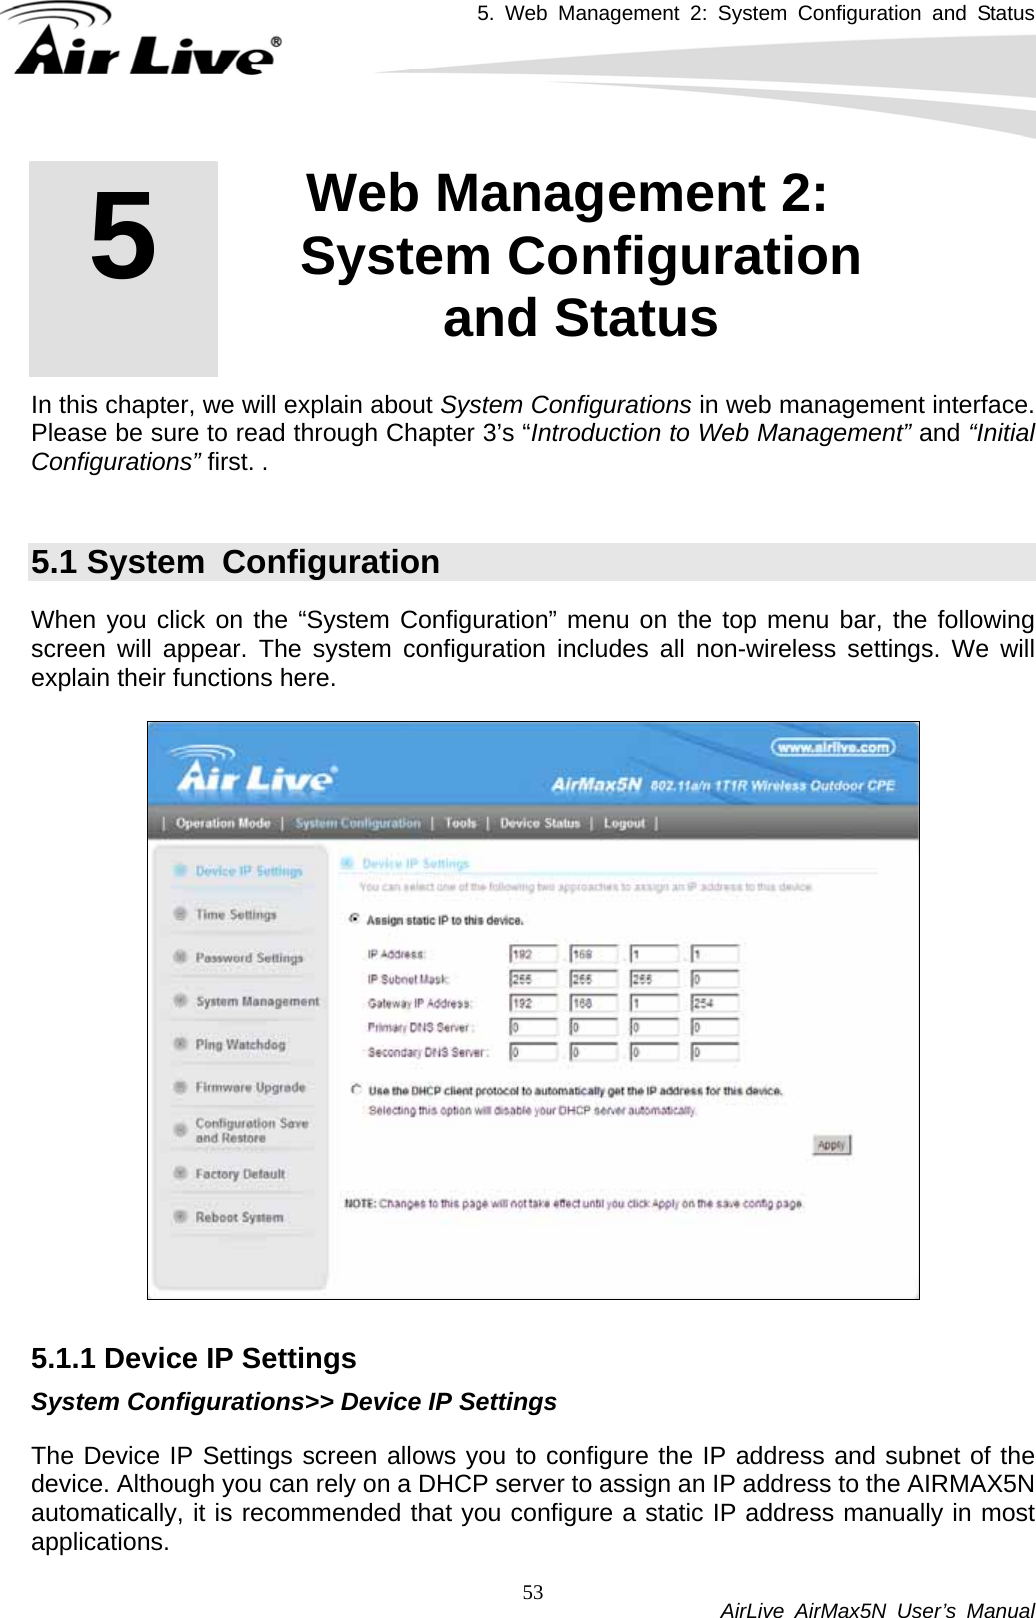 5. Web Management 2: System Configuration and Status           AirLive AirMax5N User’s Manual 53        In this chapter, we will explain about System Configurations in web management interface. Please be sure to read through Chapter 3’s “Introduction to Web Management” and “Initial Configurations” first. .    5.1 System  Configuration When you click on the “System Configuration” menu on the top menu bar, the following screen will appear. The system configuration includes all non-wireless settings. We will explain their functions here.    5.1.1 Device IP Settings System Configurations&gt;&gt; Device IP Settings The Device IP Settings screen allows you to configure the IP address and subnet of the device. Although you can rely on a DHCP server to assign an IP address to the AIRMAX5N automatically, it is recommended that you configure a static IP address manually in most applications.  5  5. Web Management 2: System Configuration and Status  